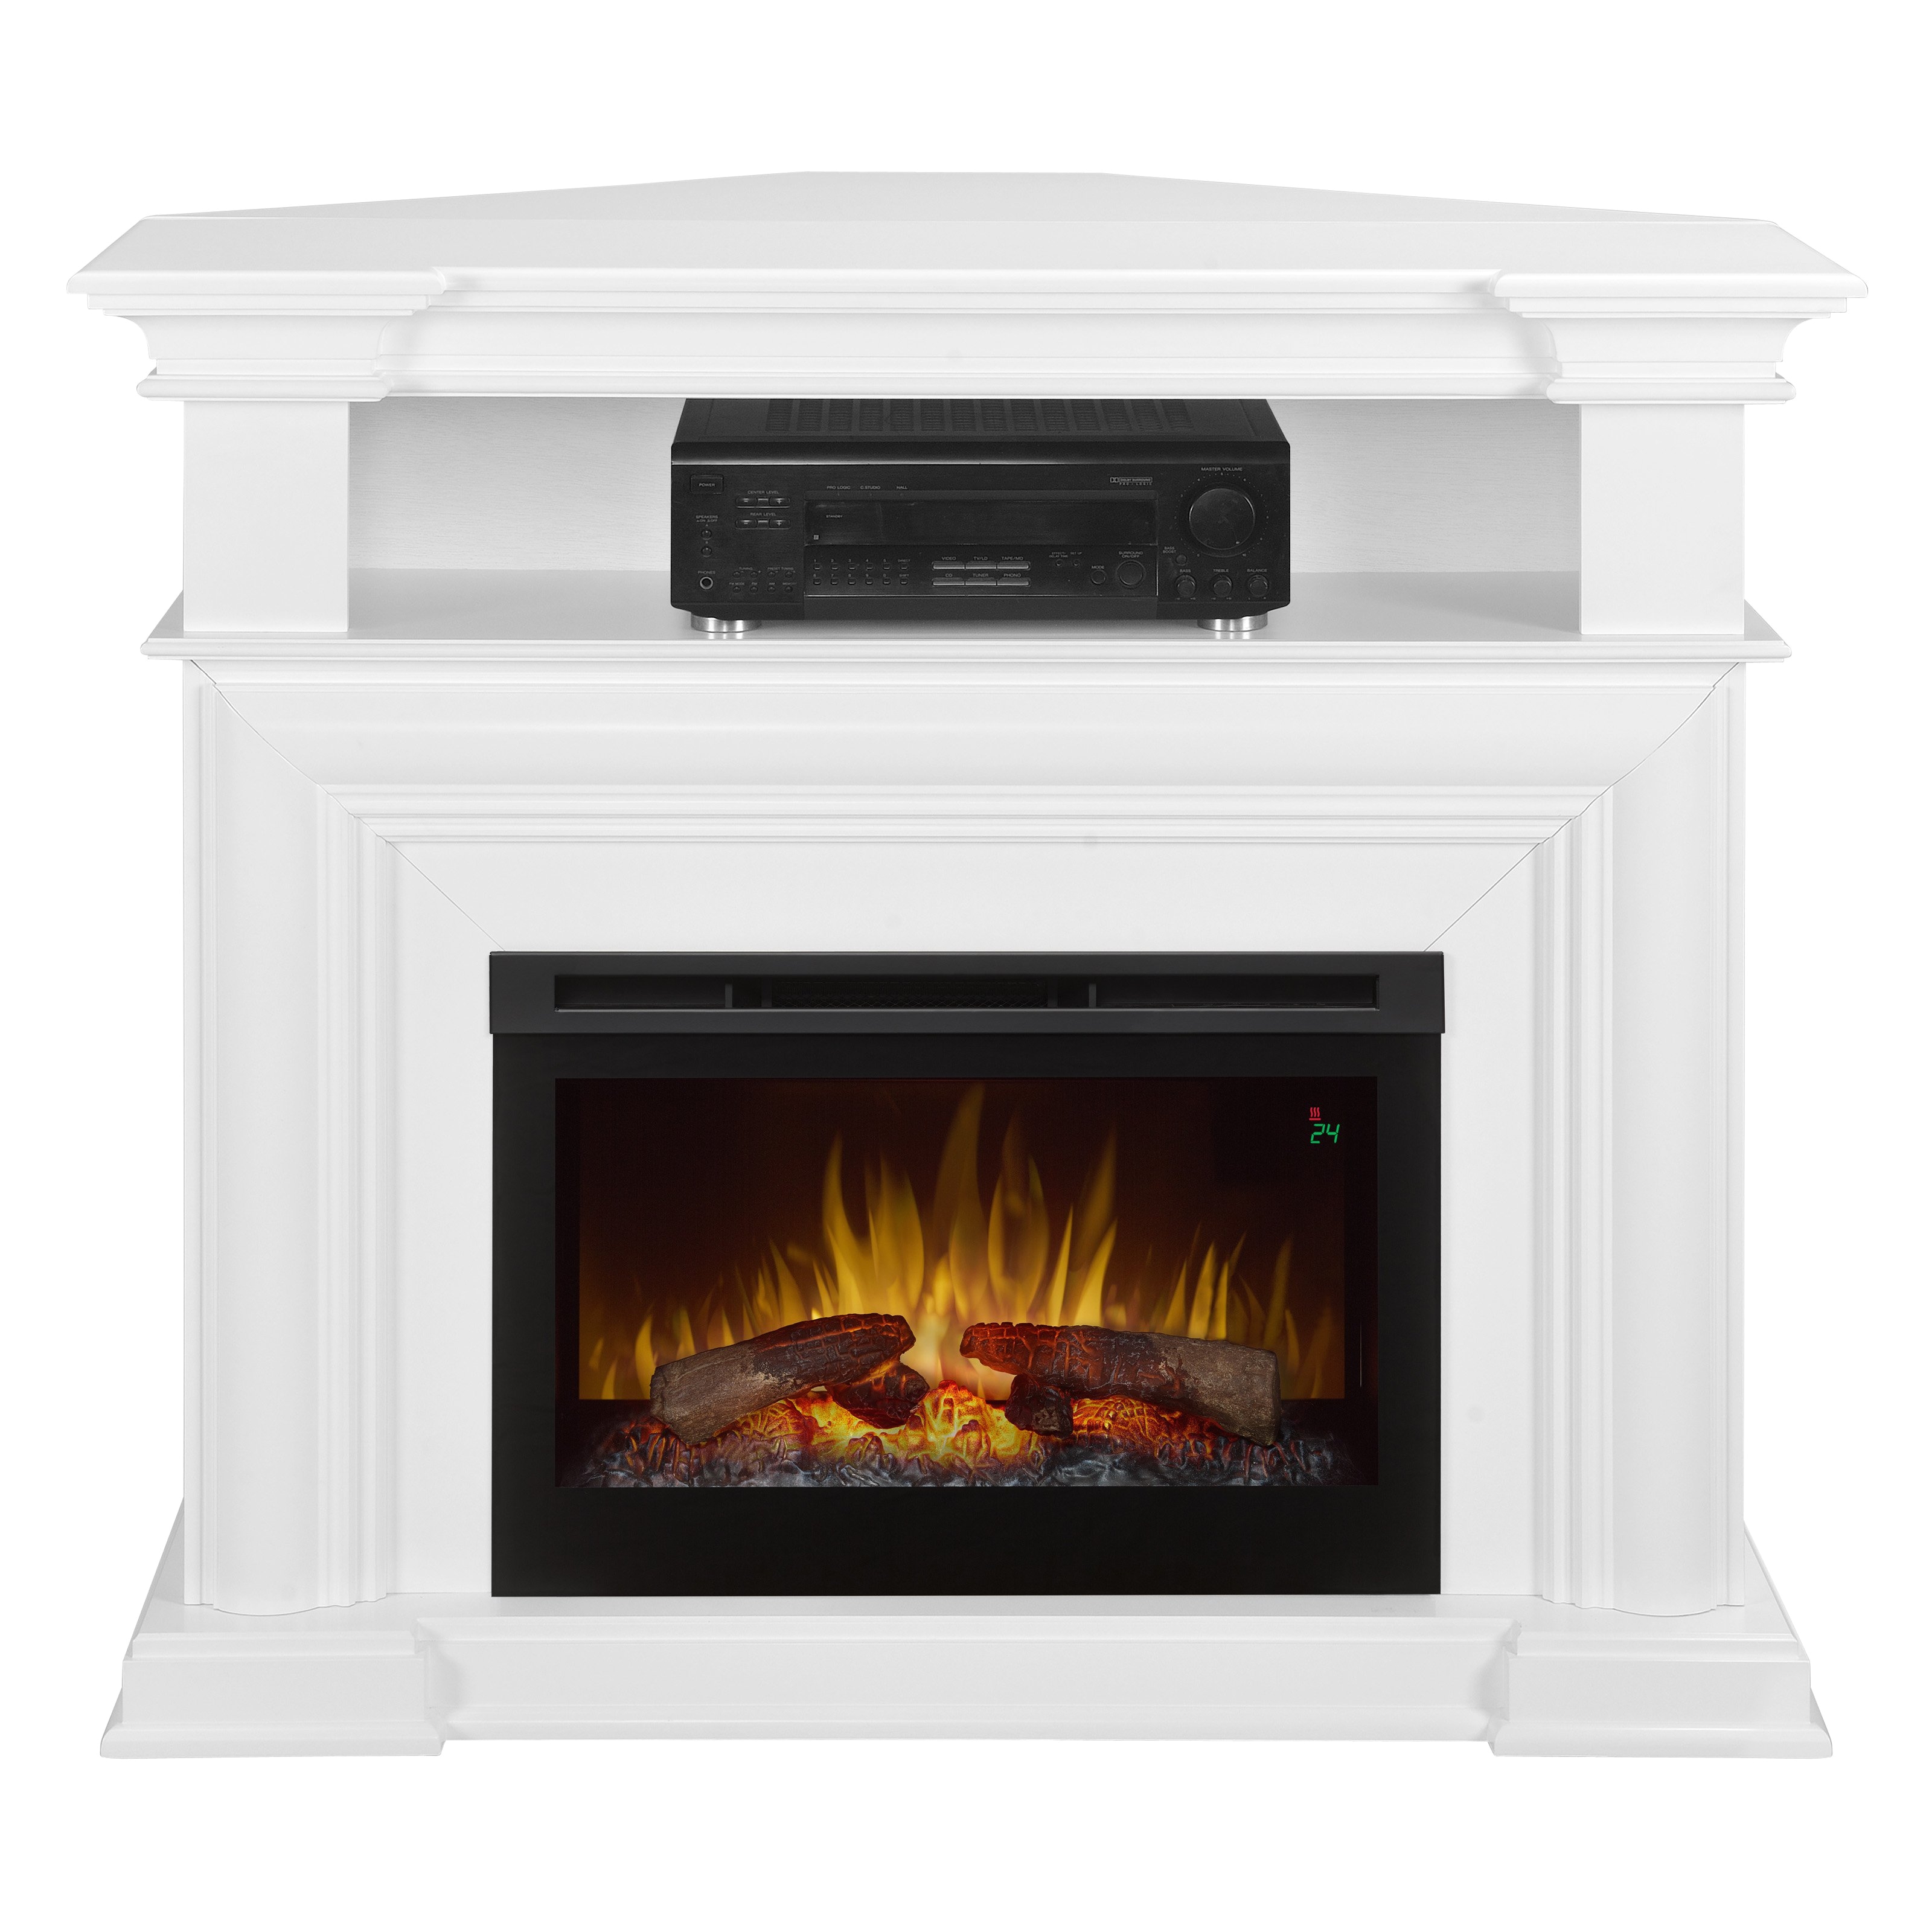 Gas Fireplace Sizes Inspirational Electric Log Inserts for Existing Fireplaces Natural Gas